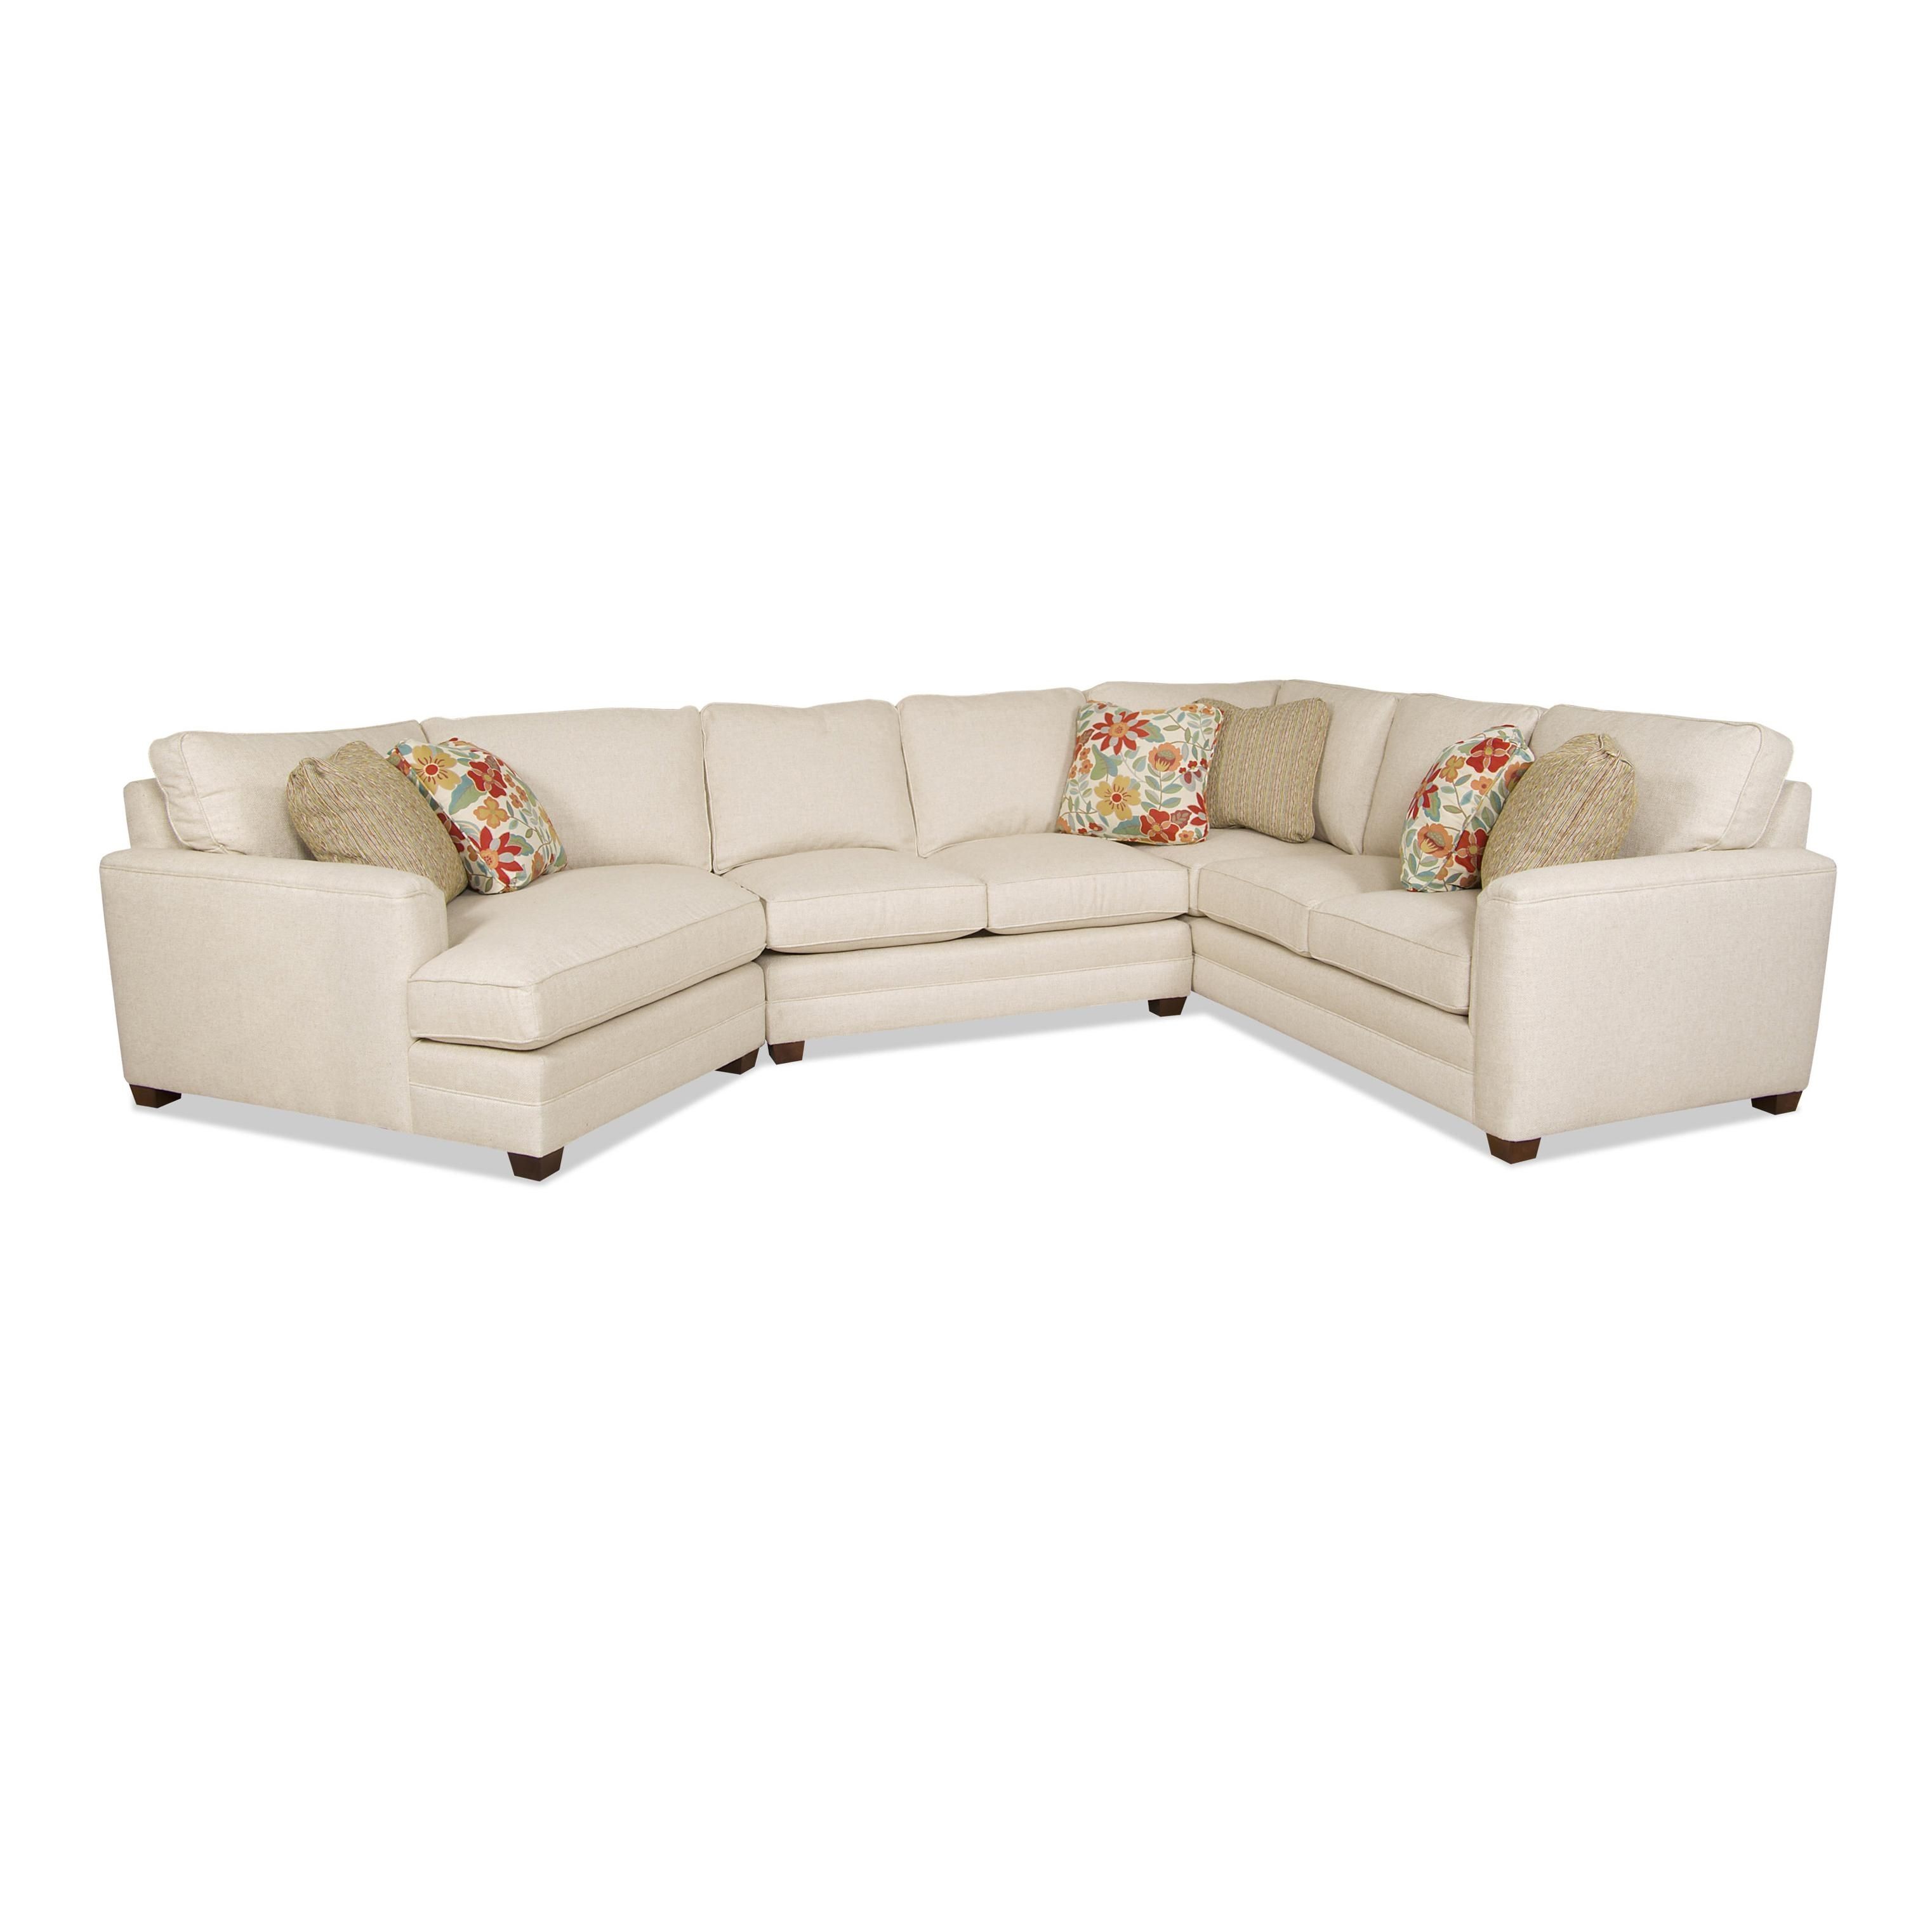 Sam Moore Raleigh Transitional Sectional Sofa – Ahfa – Sofa Inside Raleigh Sectional Sofas (View 5 of 10)